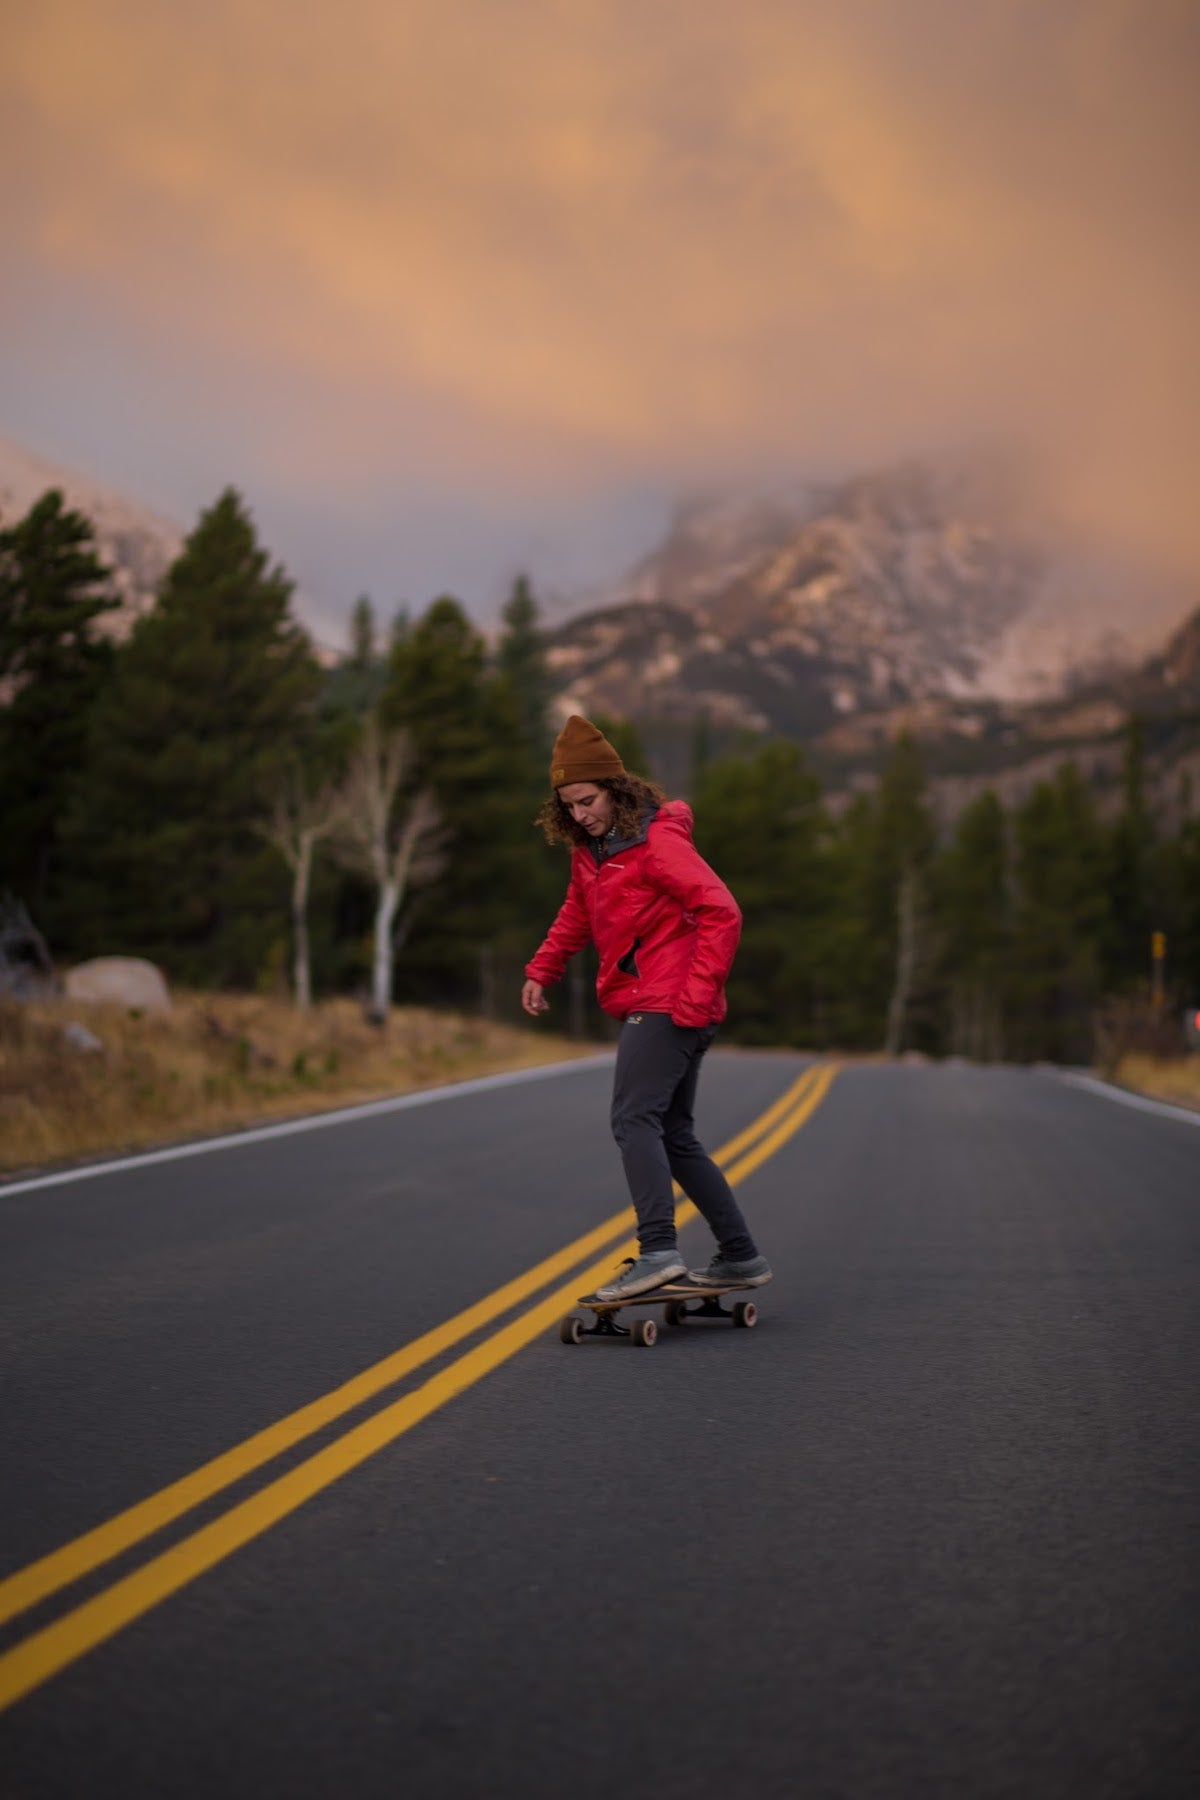 Skateboarder riding downhill on mountain road with snowy peaks in the background